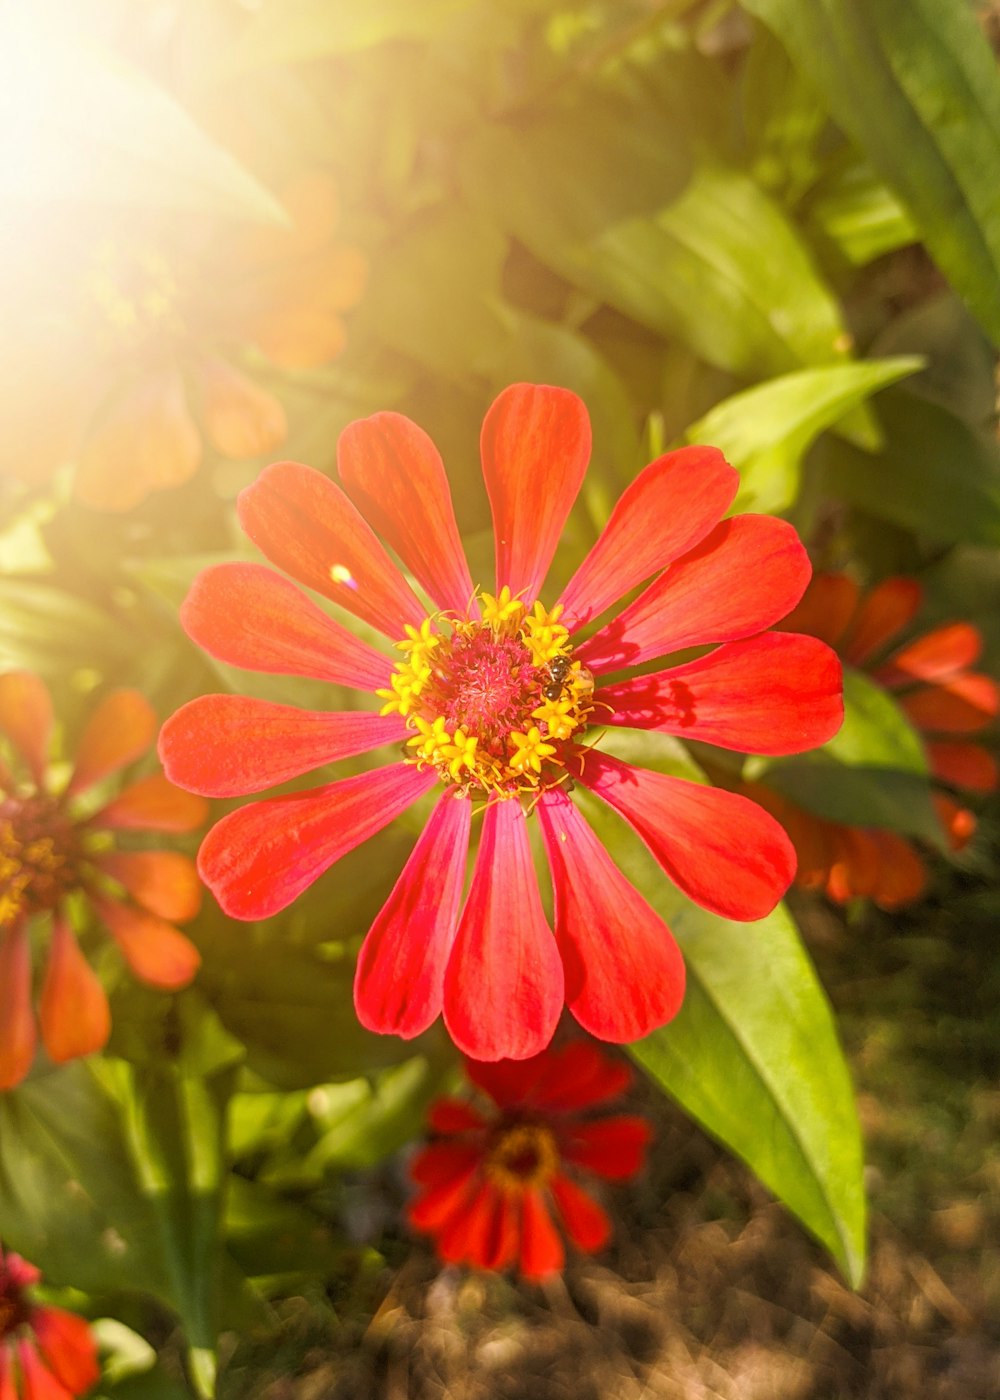 a red flower with a yellow center surrounded by green leaves